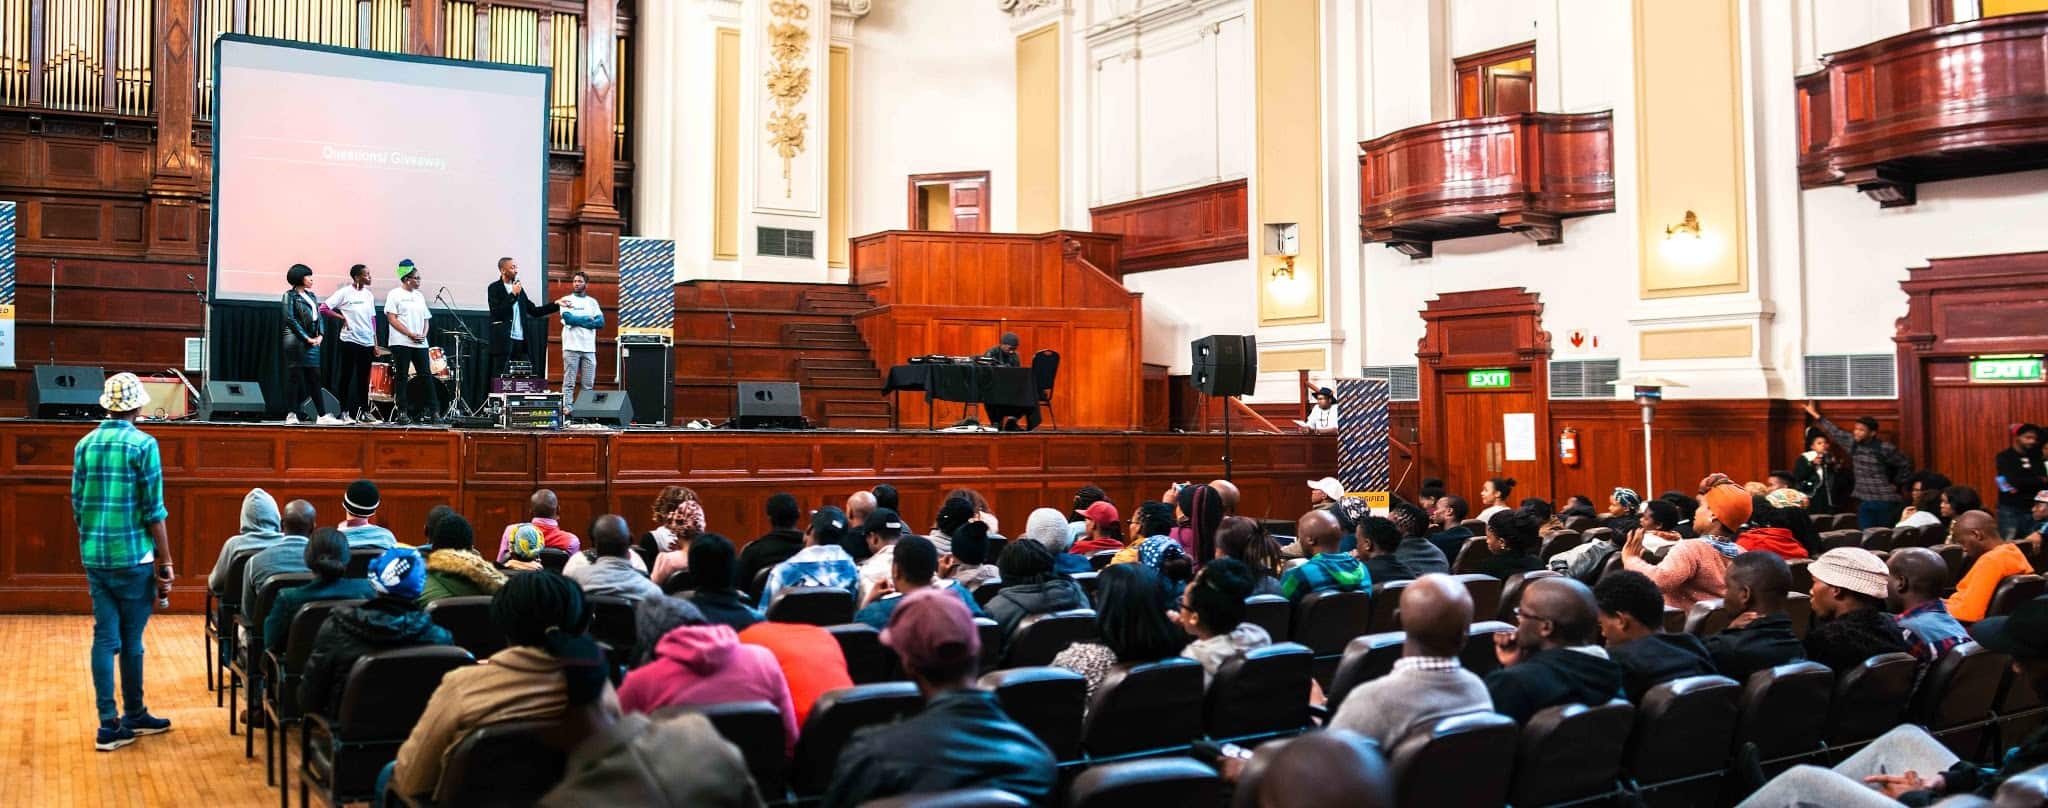 A recent Digital Skills training session at City Hall in Johannesburg, S. Africa